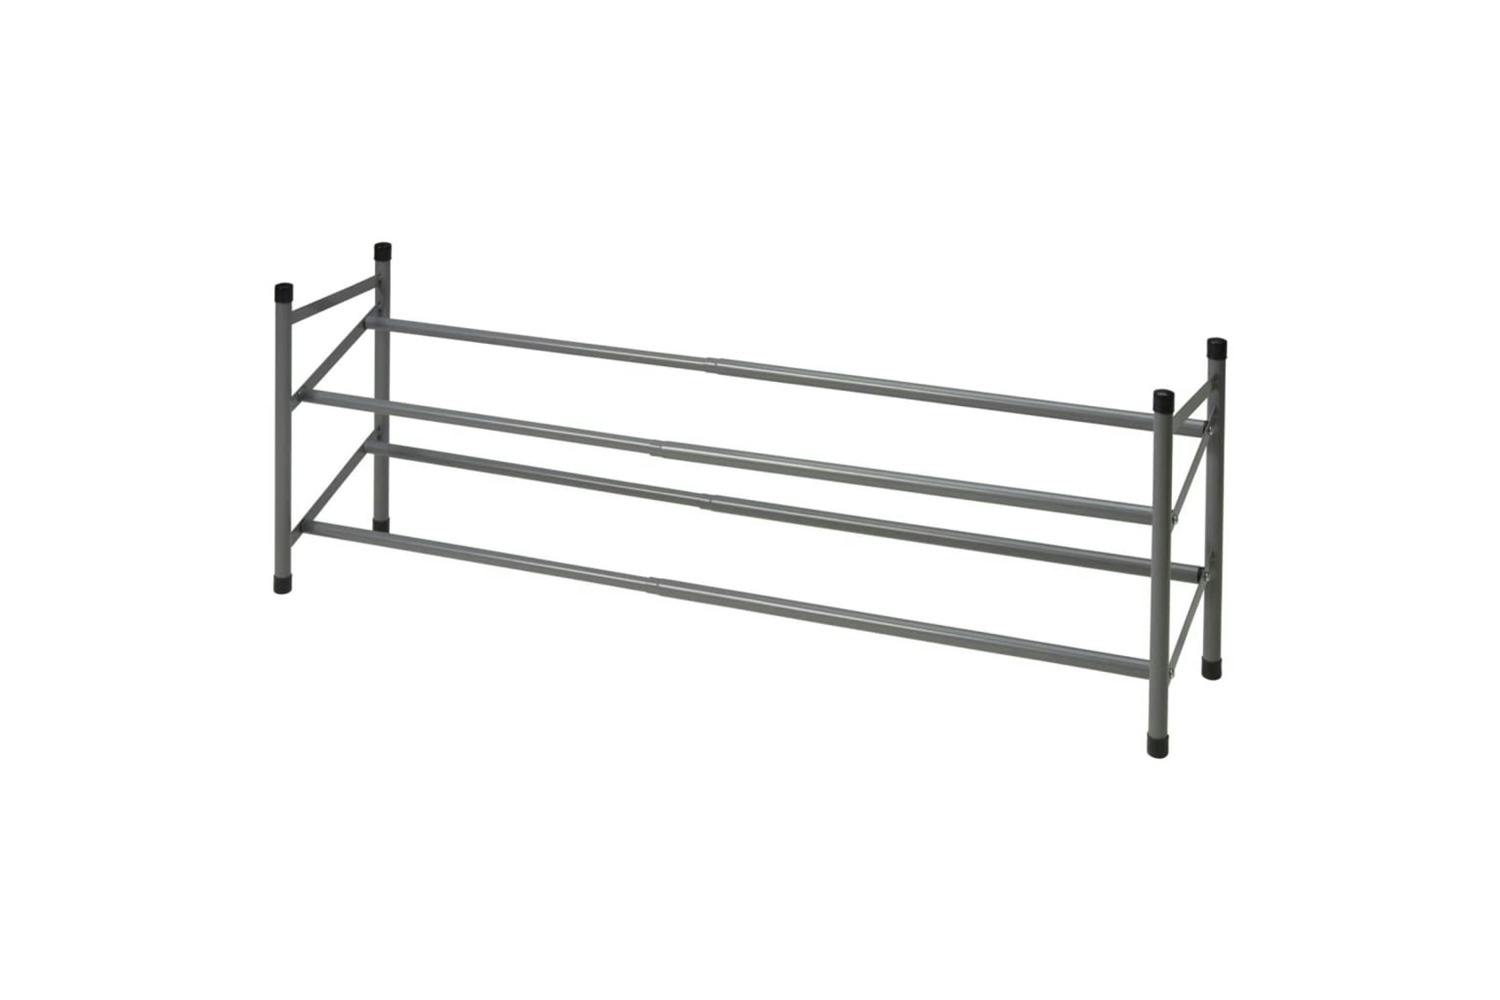 Storage Solutions 442519 Storage Solutions Shoe Rack With 2 Levels (61.5-115)x23x38 Cm